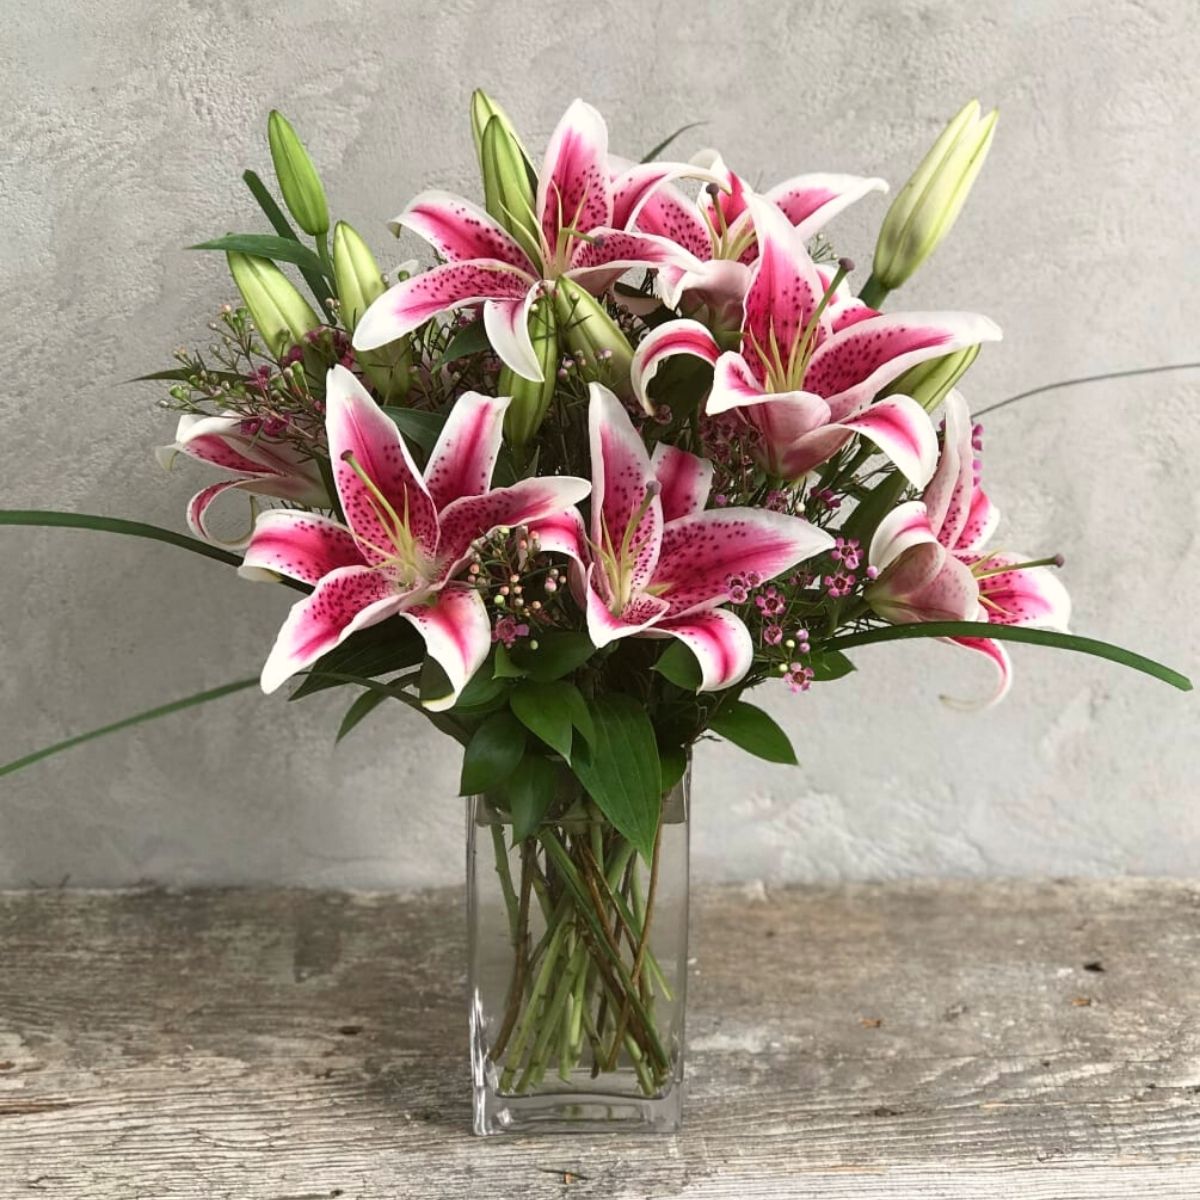 Lilies are heartfelt gifts with a special meaning behind